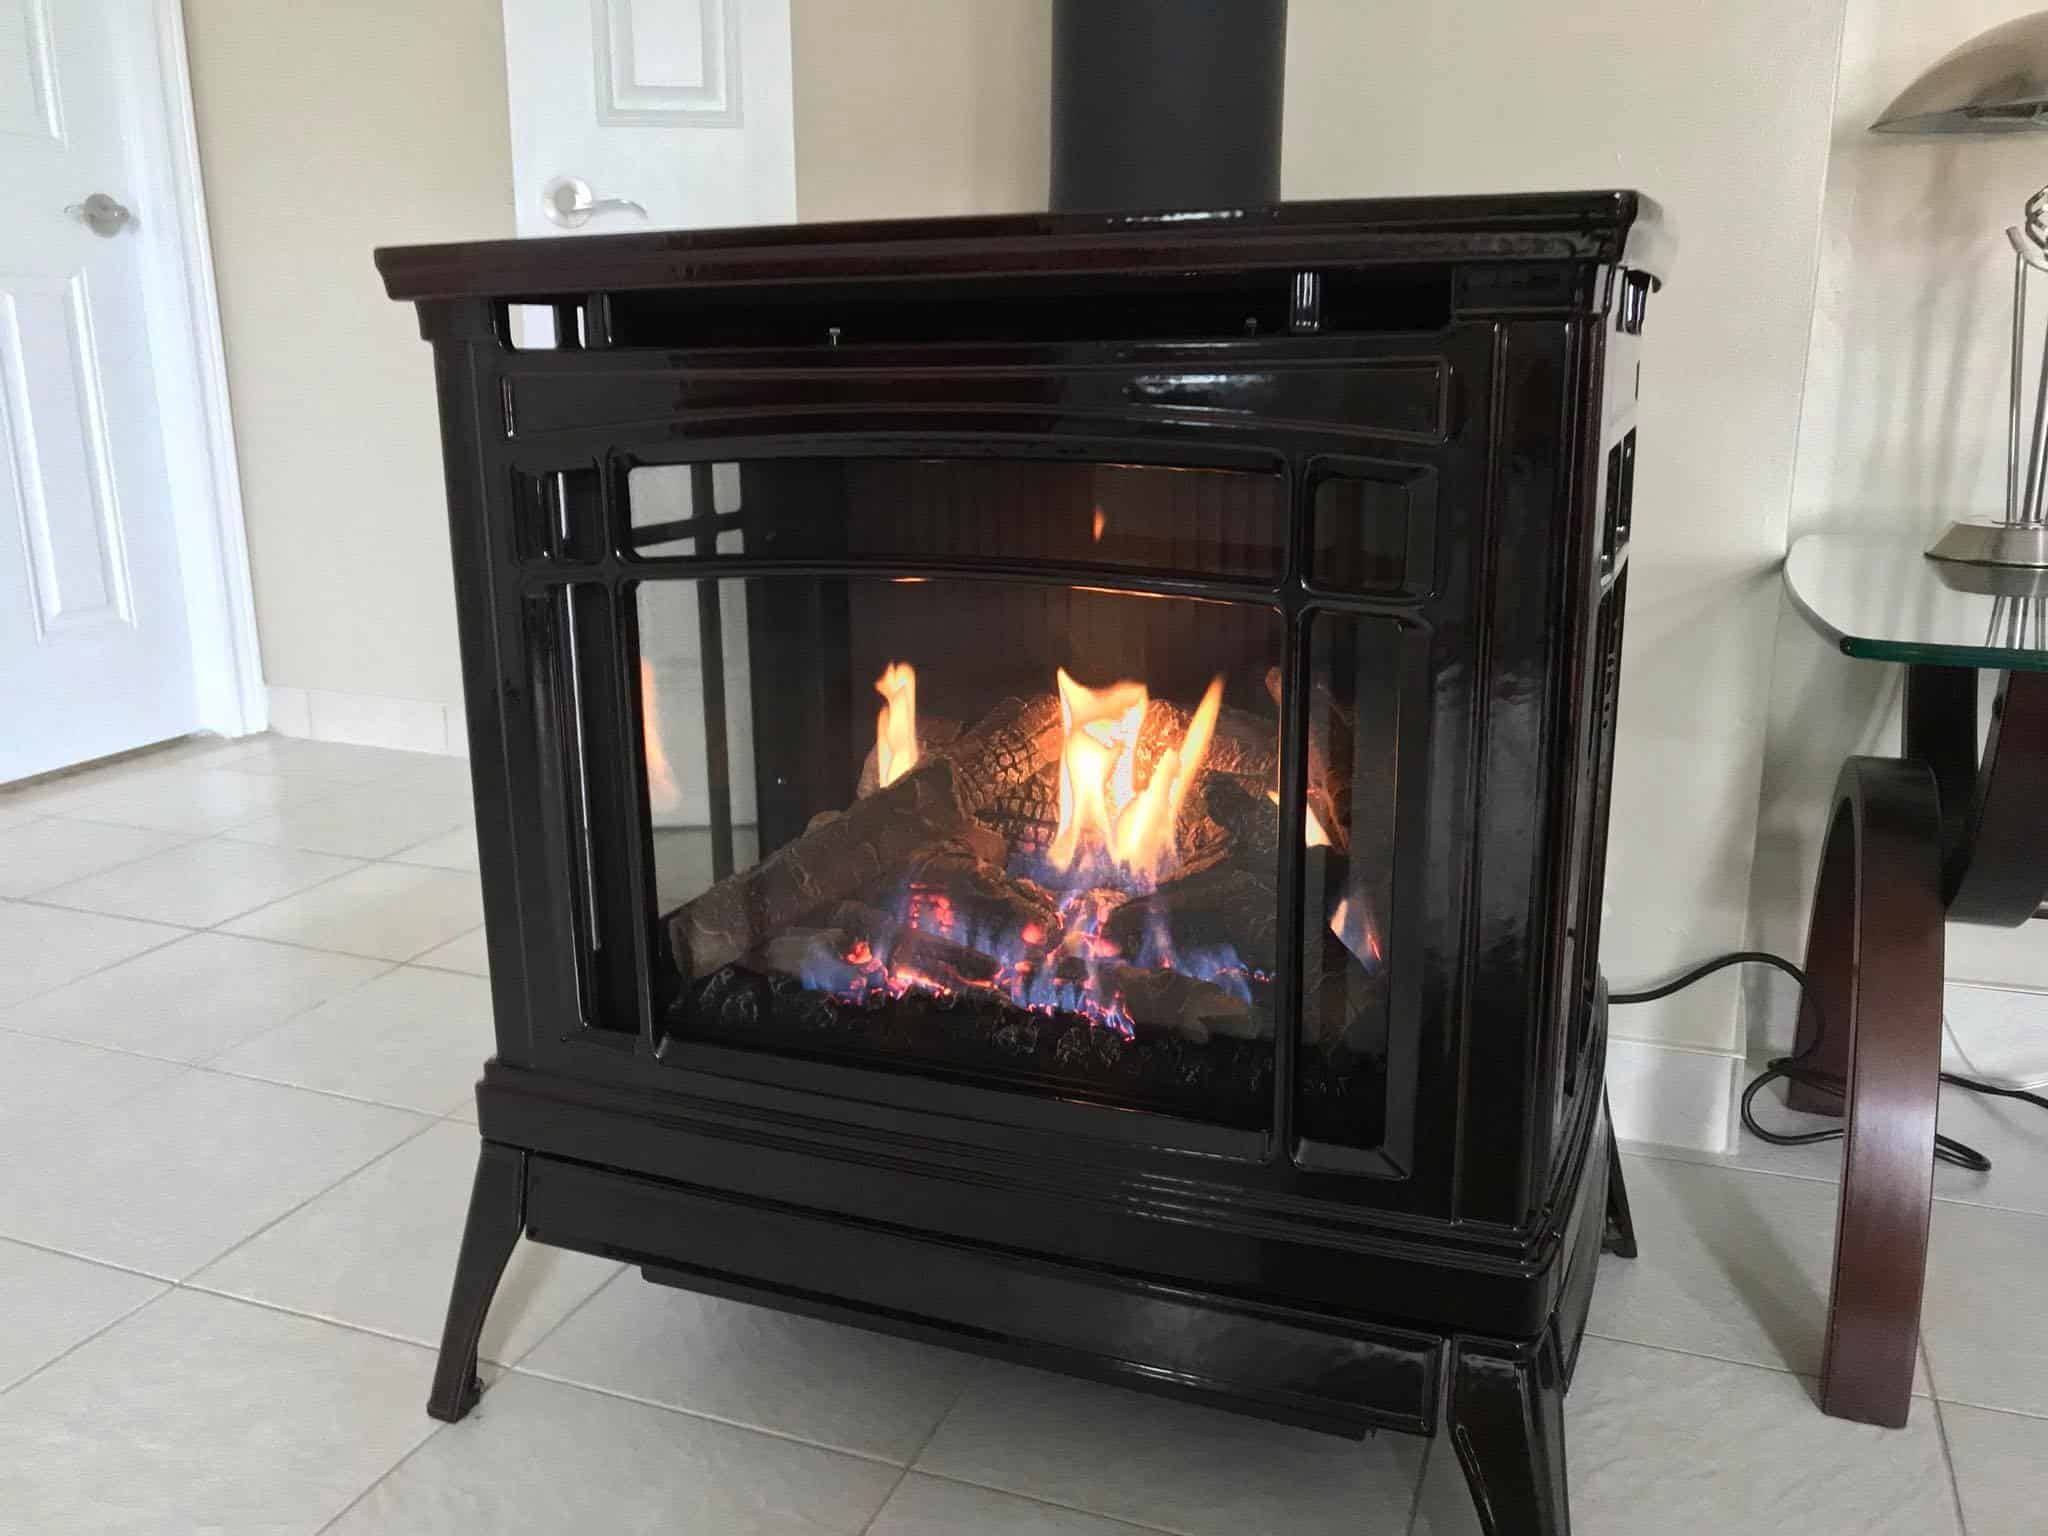 What Causes White Film On Gas Fireplace Glass